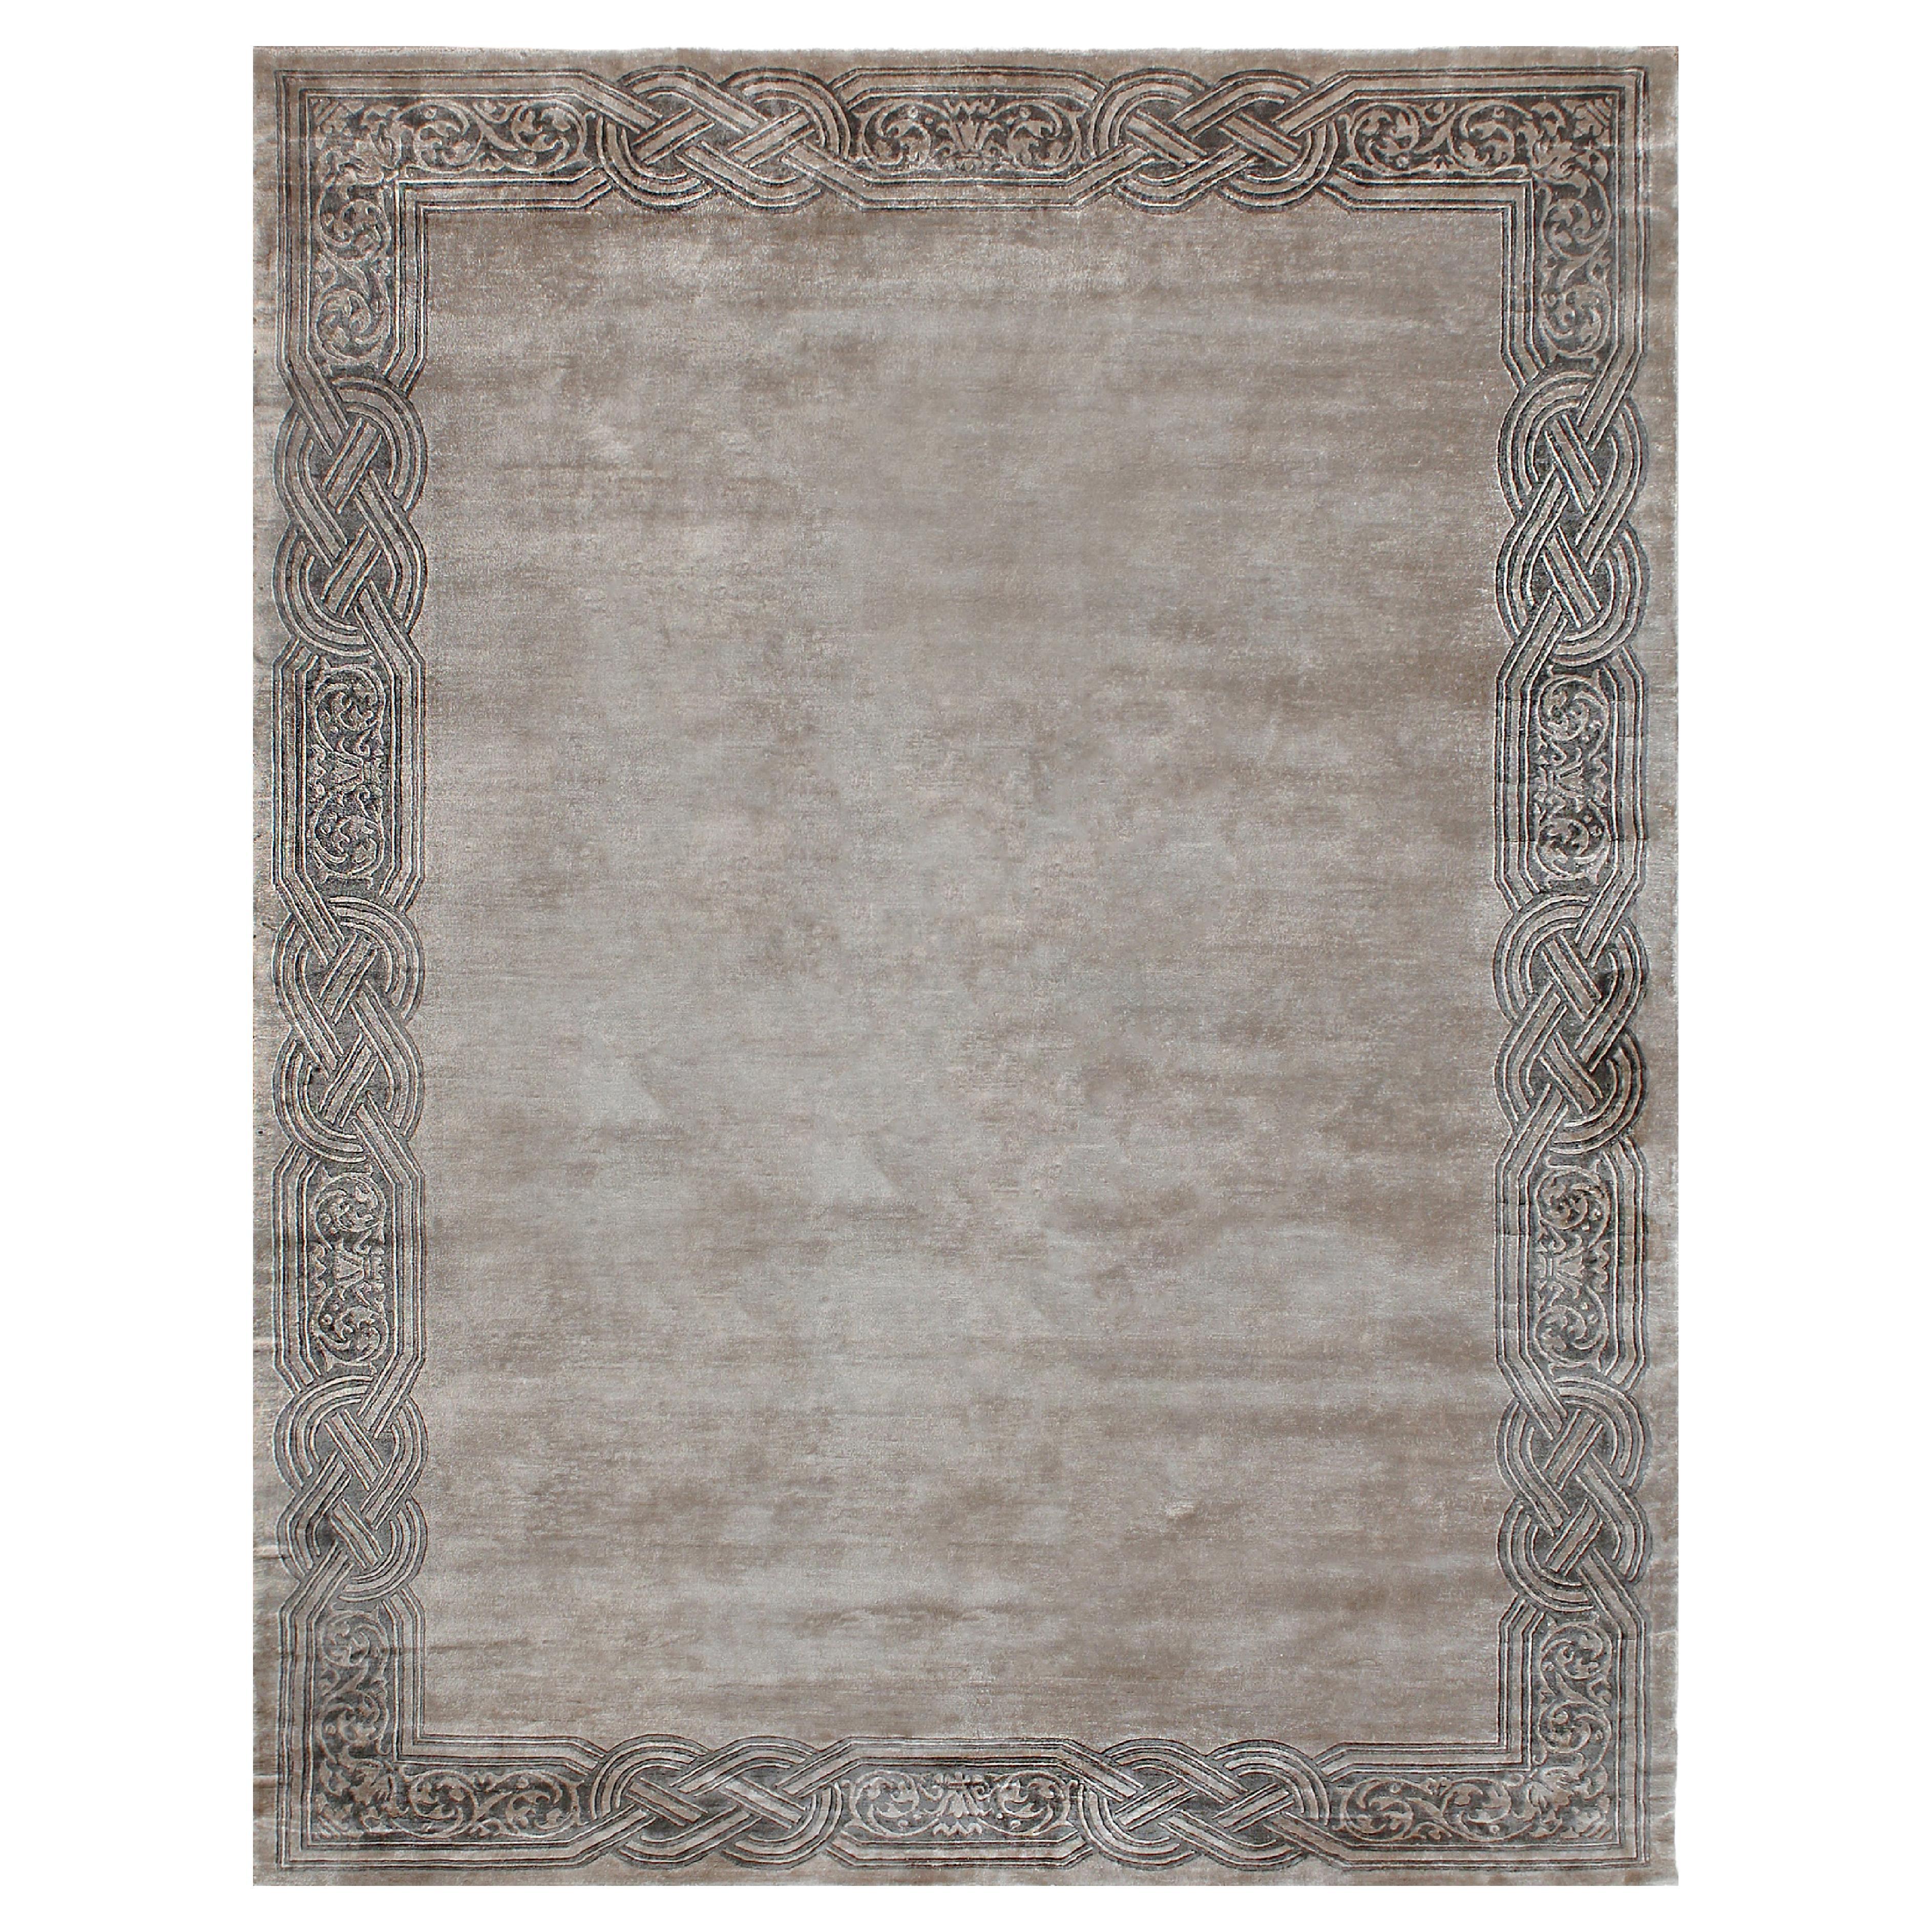 CADENCIA Hand Knotted Transitional Border Silk Rug, Beige Taupe Colour By Hands For Sale